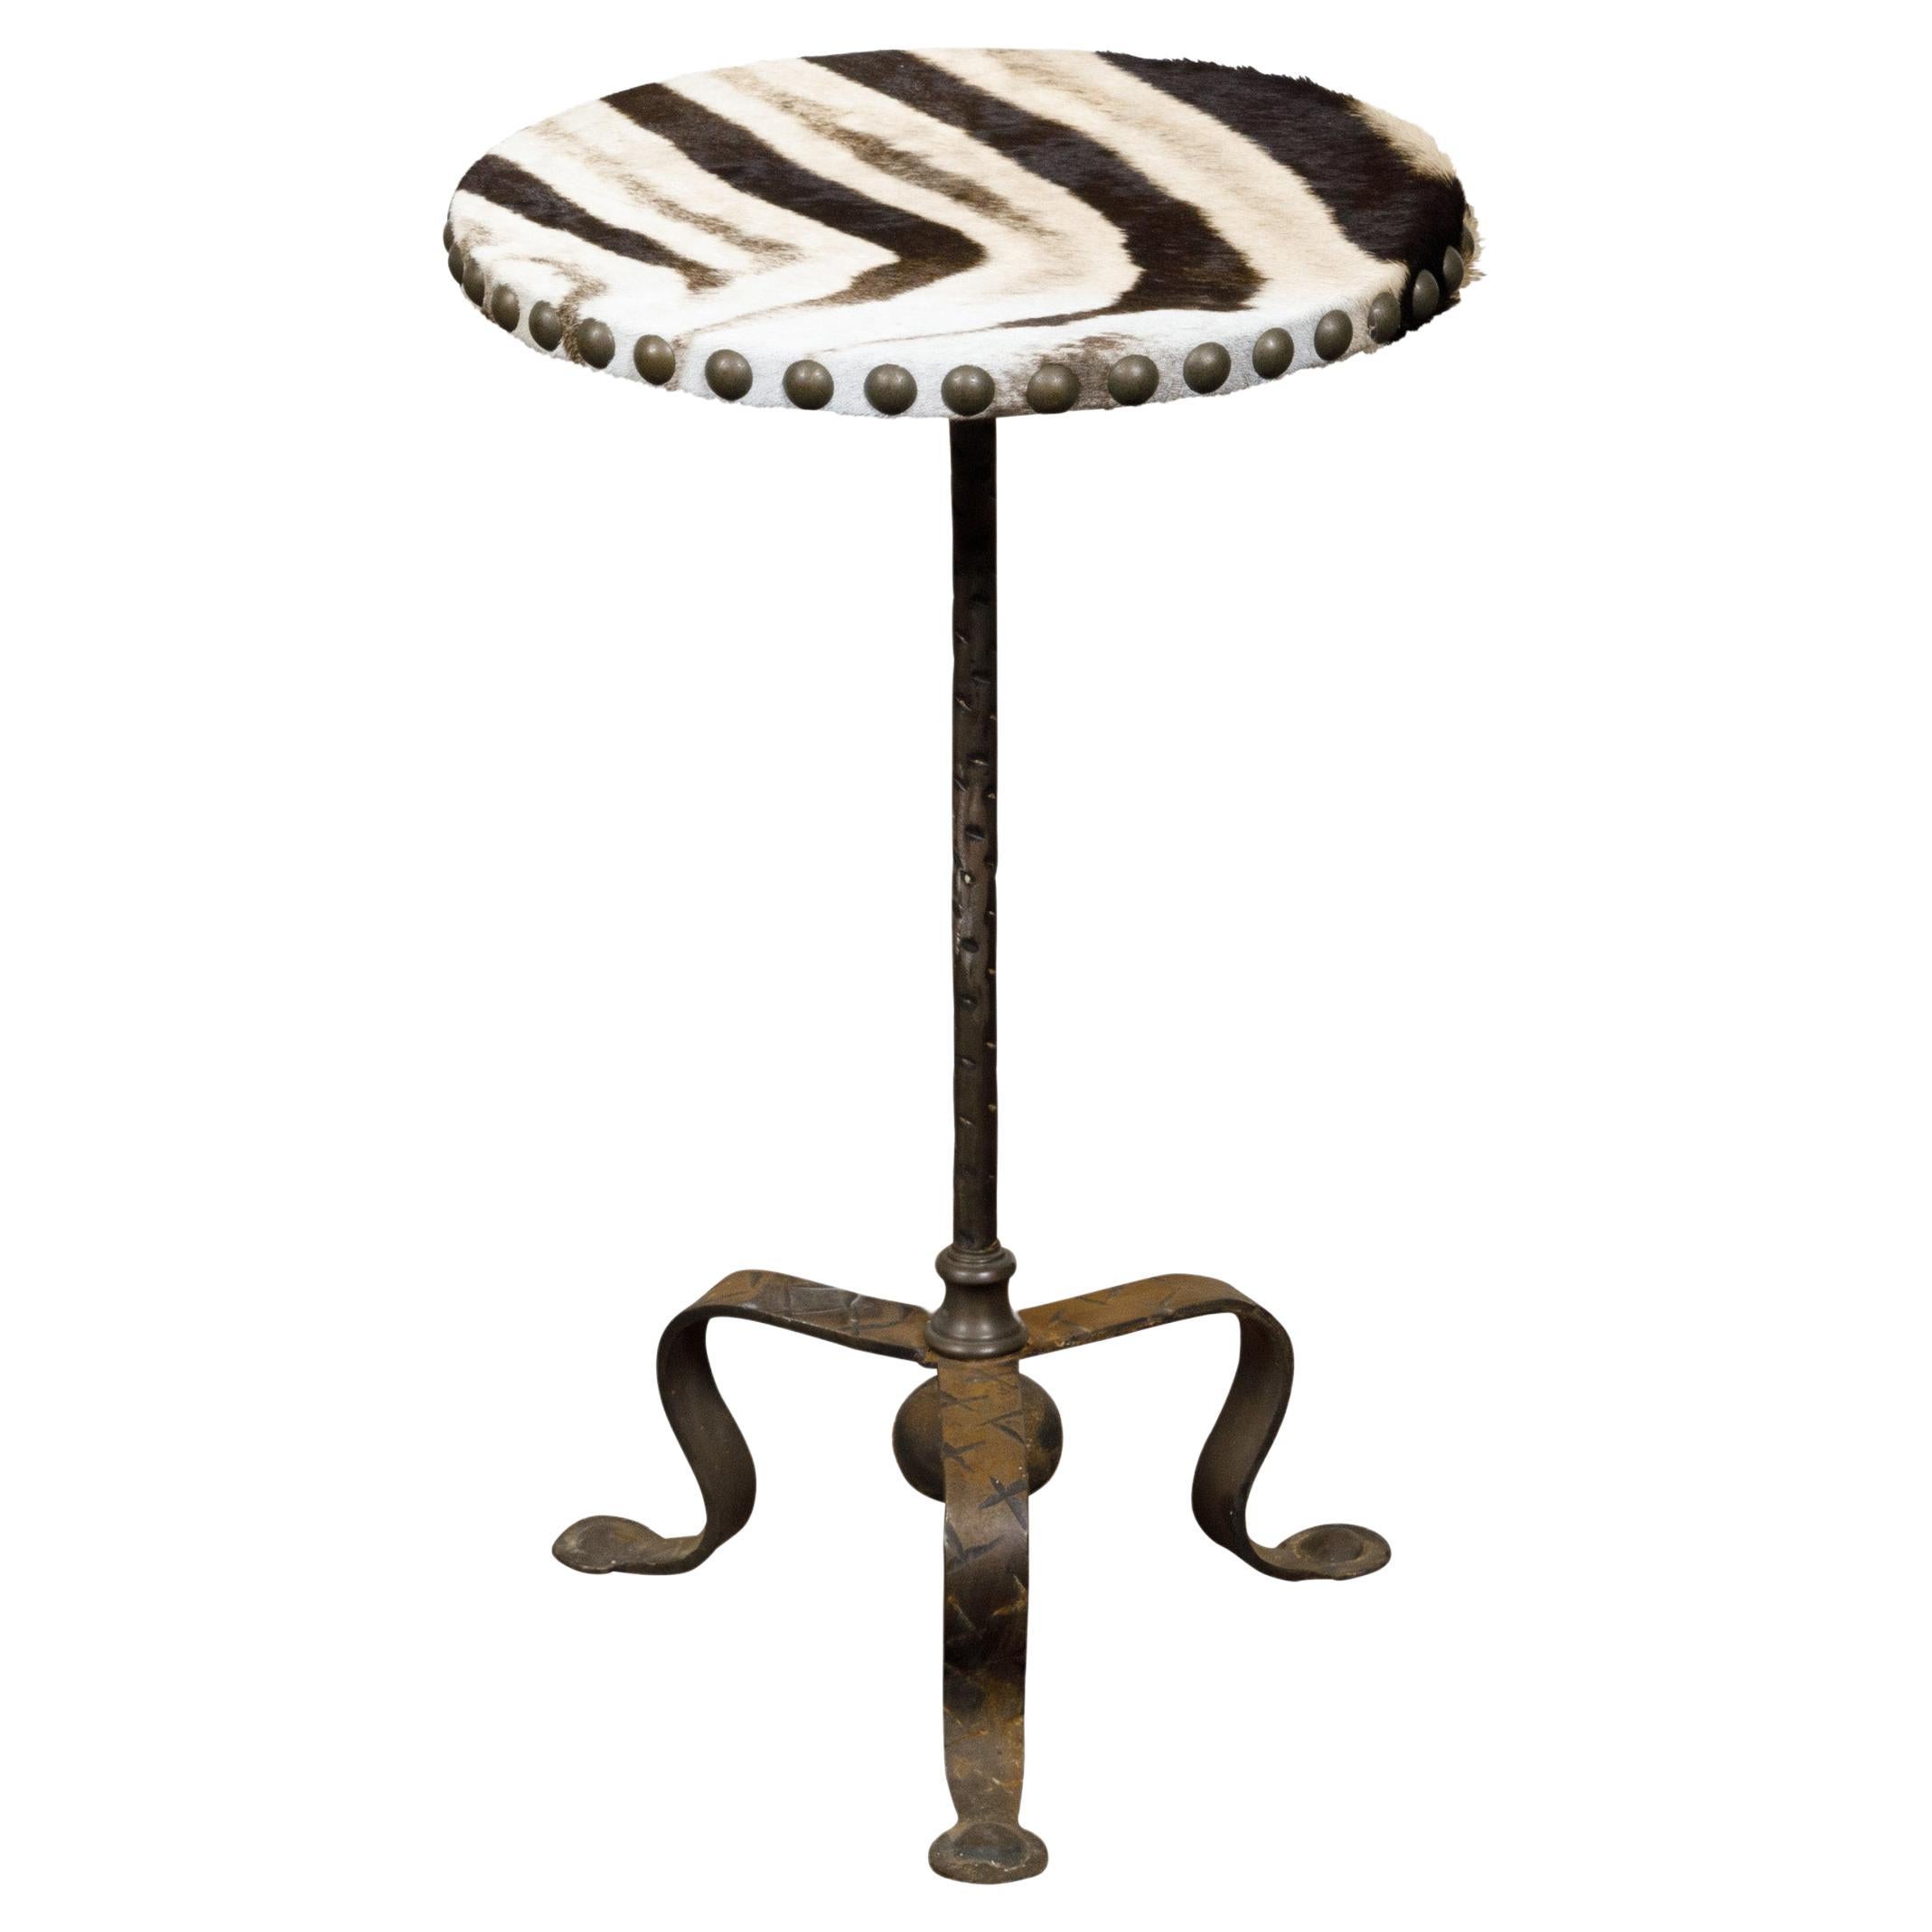 Midcentury French Iron and Zebra Hide Guéridon Table with Tripod Scrolling Base For Sale